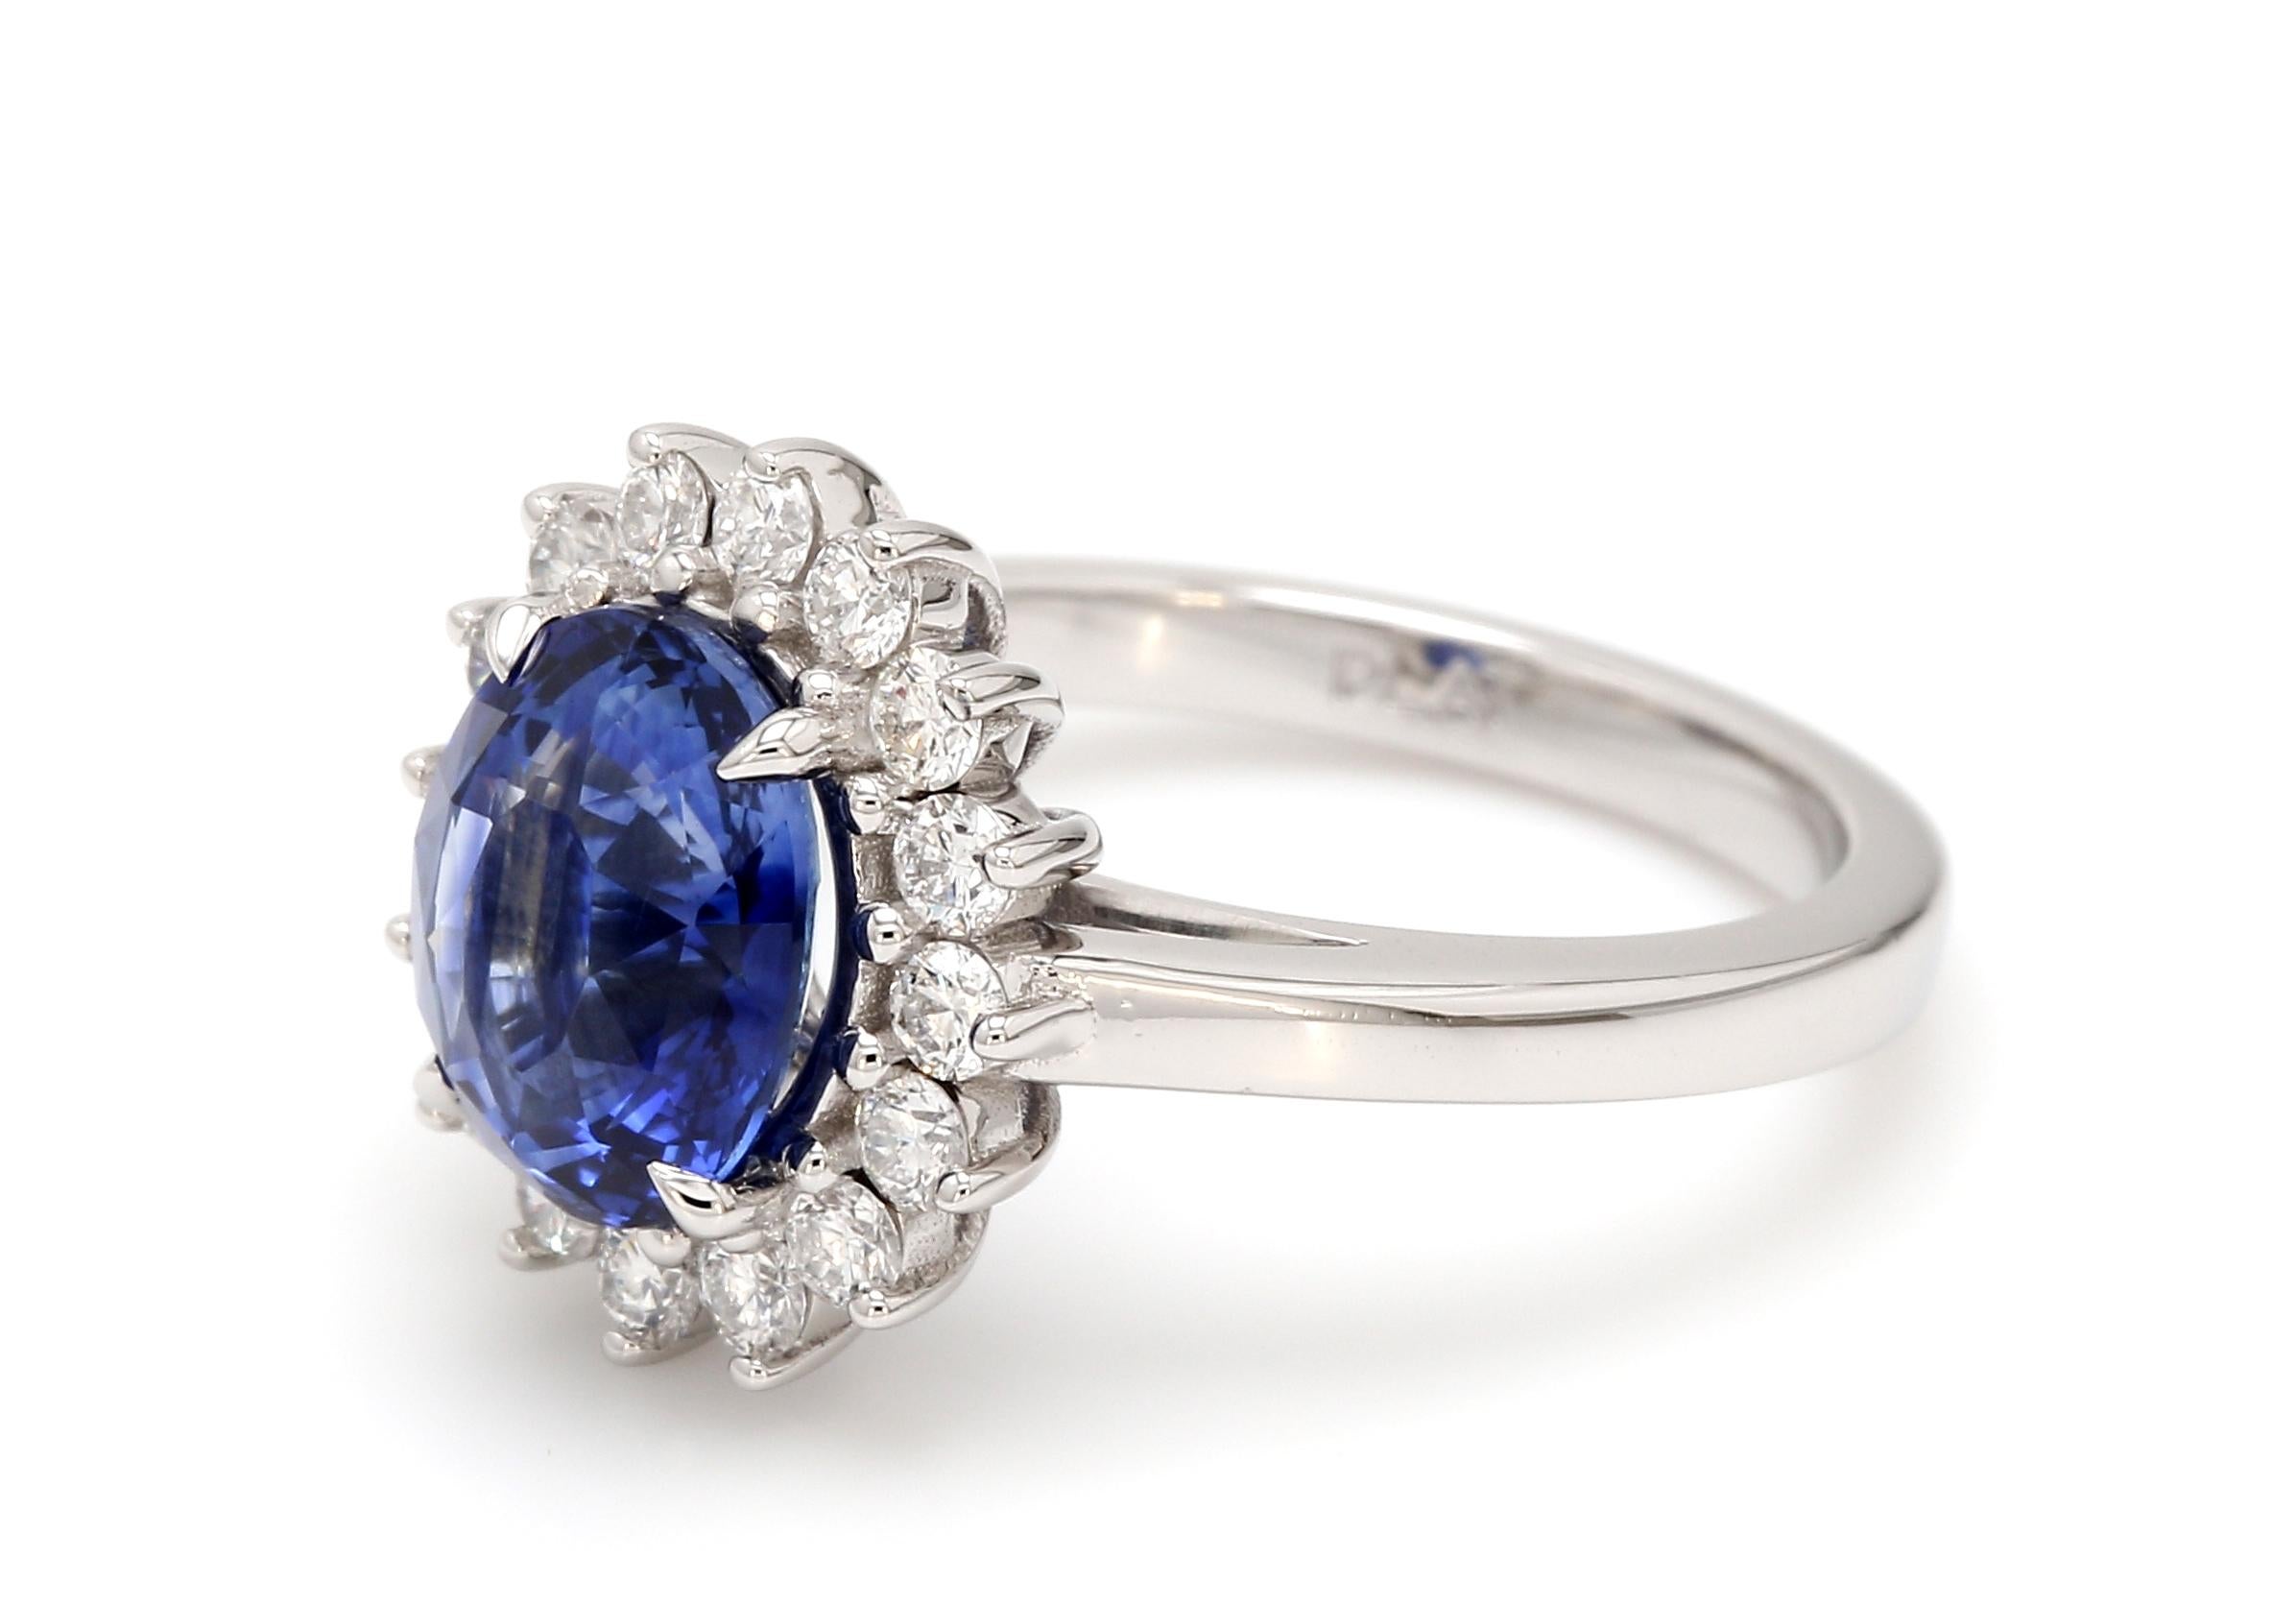 Stunning Lady Diana Inspired Blue Sapphire Diamond Engagement Ring, featuring:
✧ 3.07 total carat weight natural AGL certified Transparent Blue Sapphire
✧ Minor heating treatment and excellent color stability
✧ Sapphire and diamonds are mounted in a